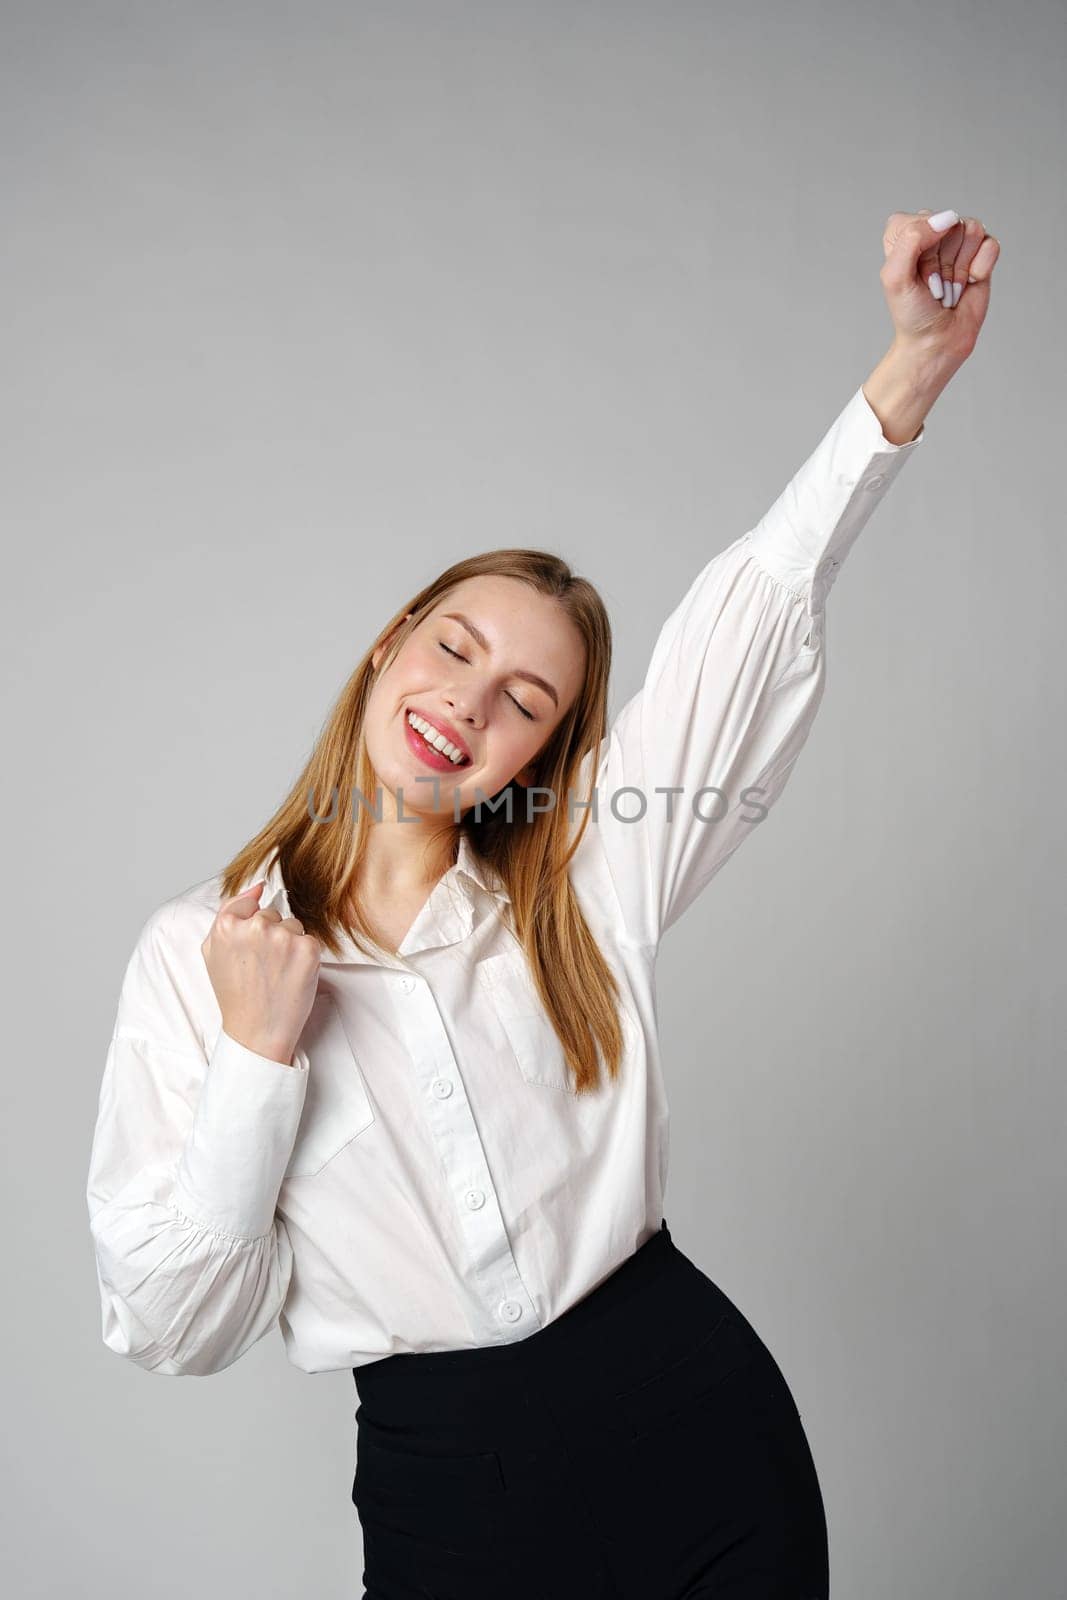 Jubilant Young Woman Celebrating a Victory With a Raised Fist in a Studio